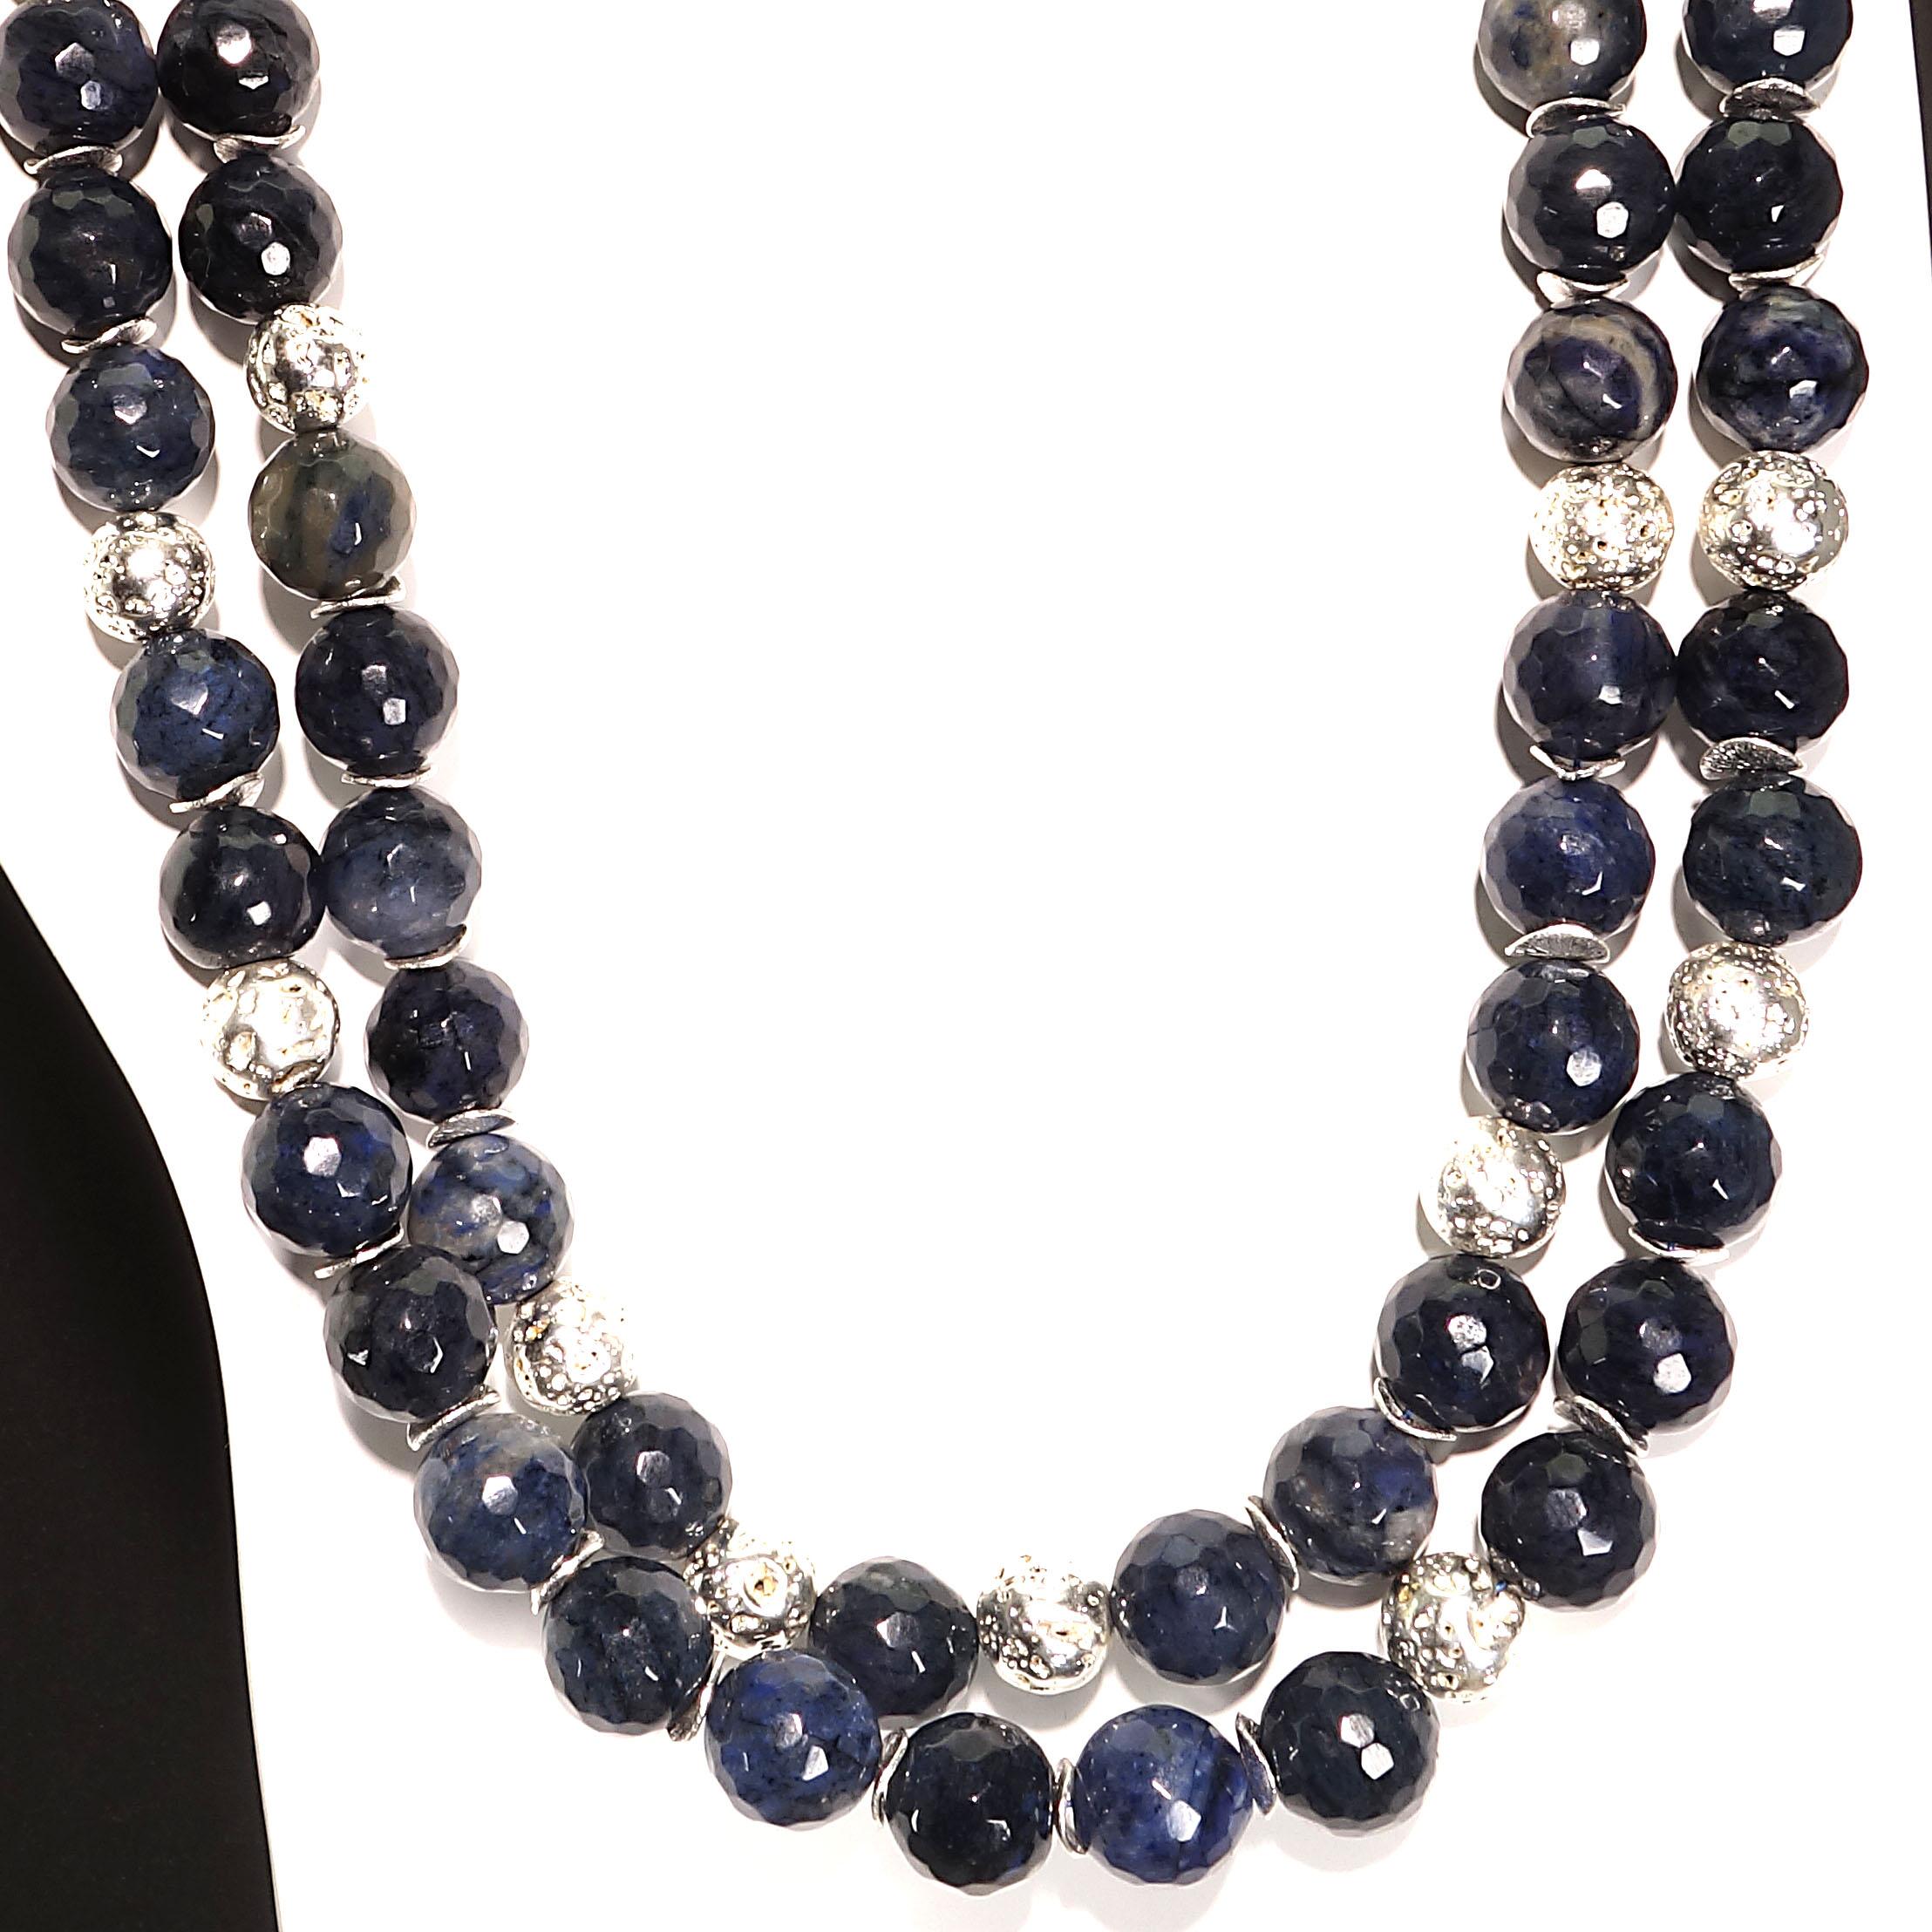 Contemporary AJD Faceted Blue Dumortierite with Silver Double Strand necklace